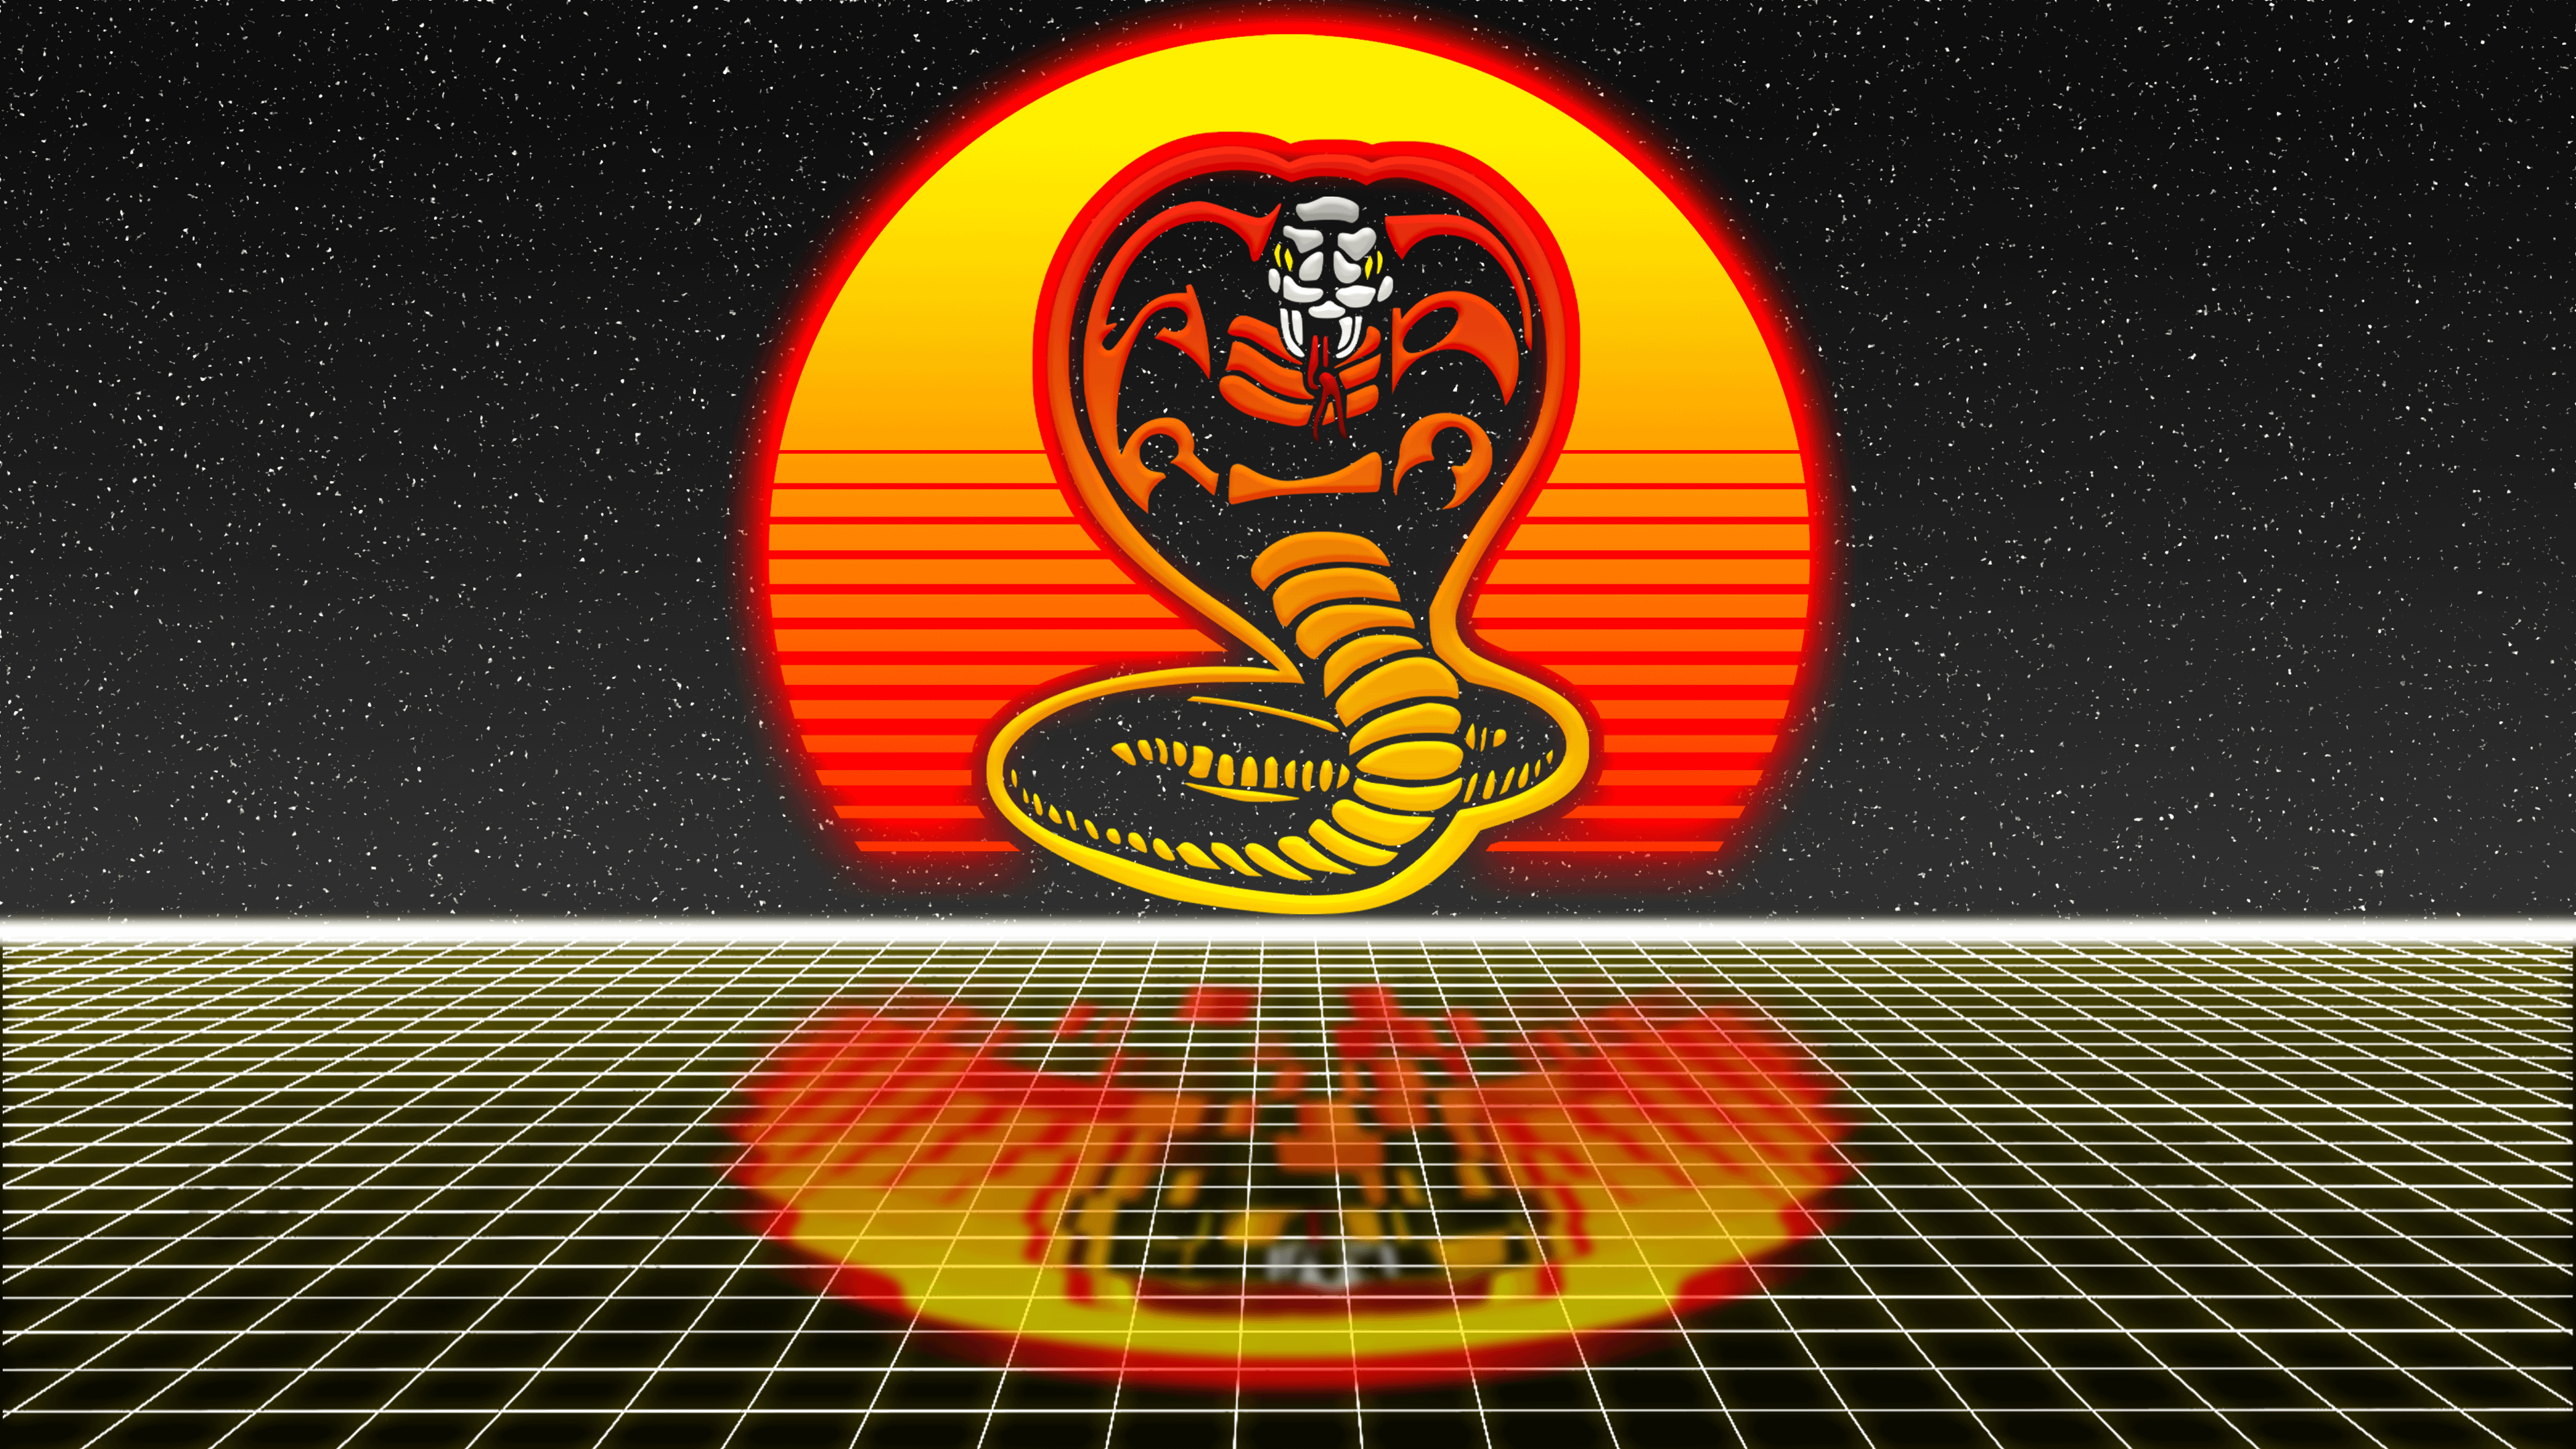 A brief description of this image that is at least 20 words but no longer than 50 words - Cobra Kai